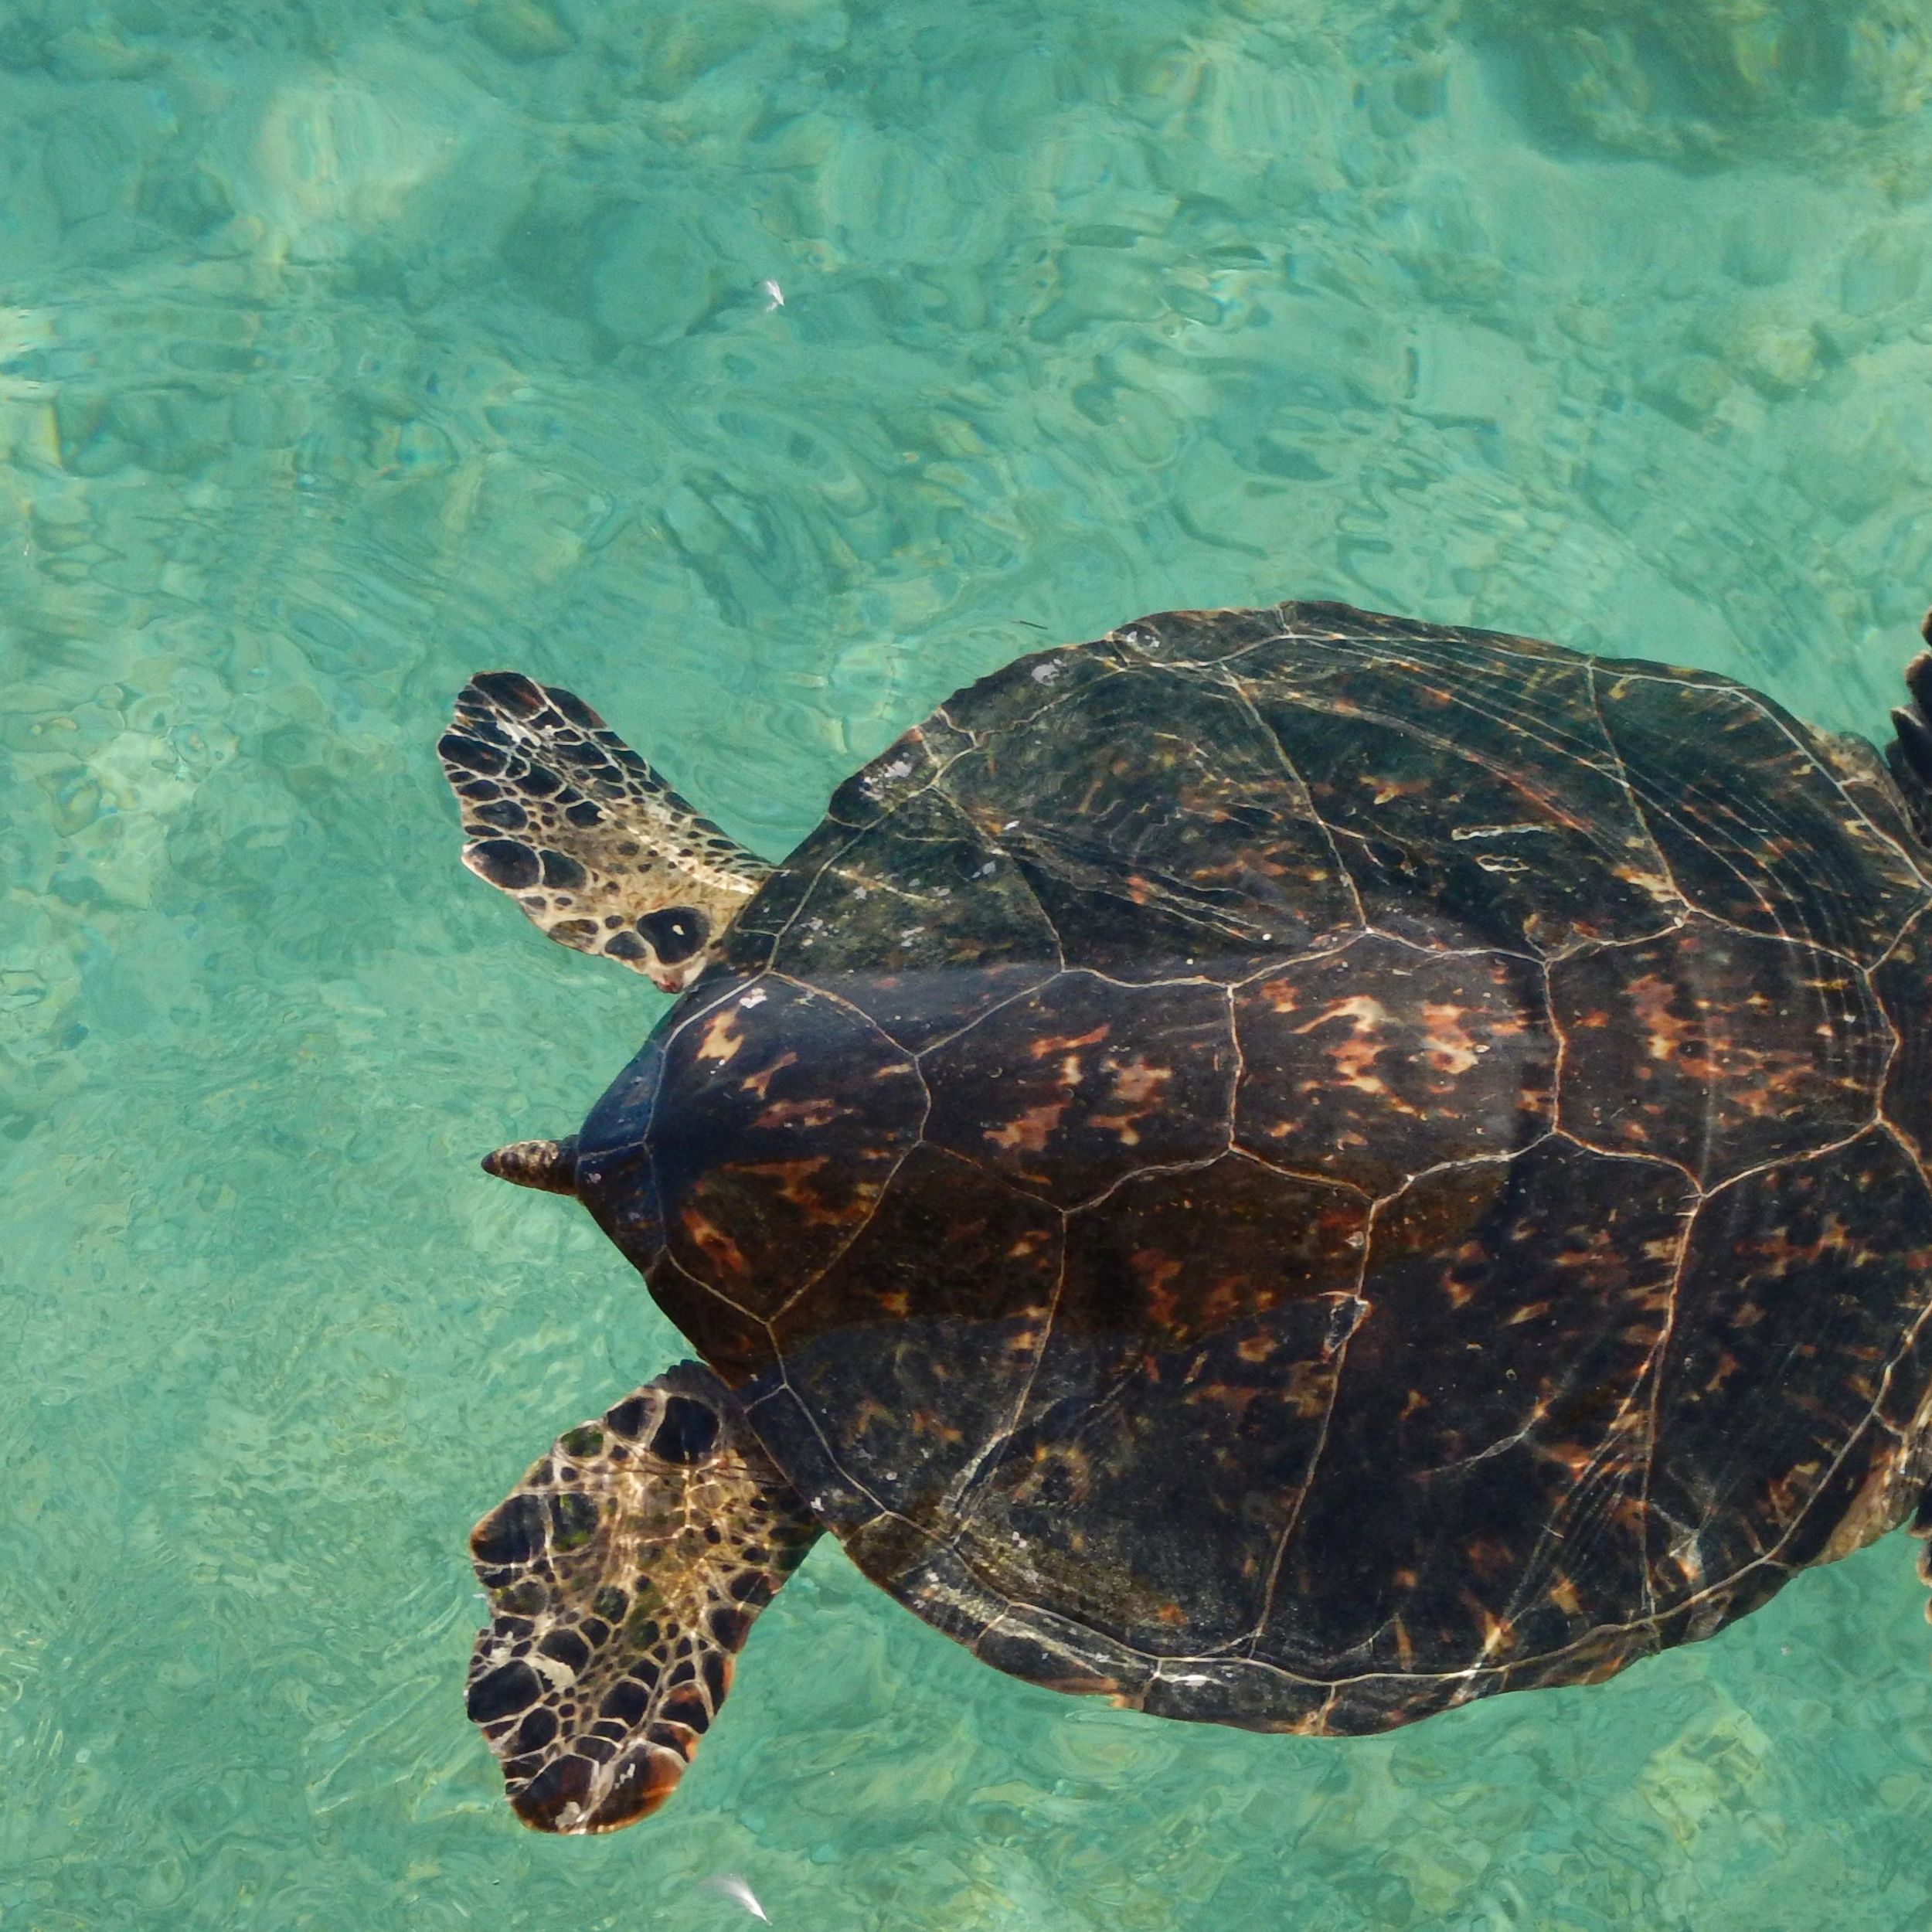 Ask Dr. Universe: Why can't sea turtles pull back into their shell